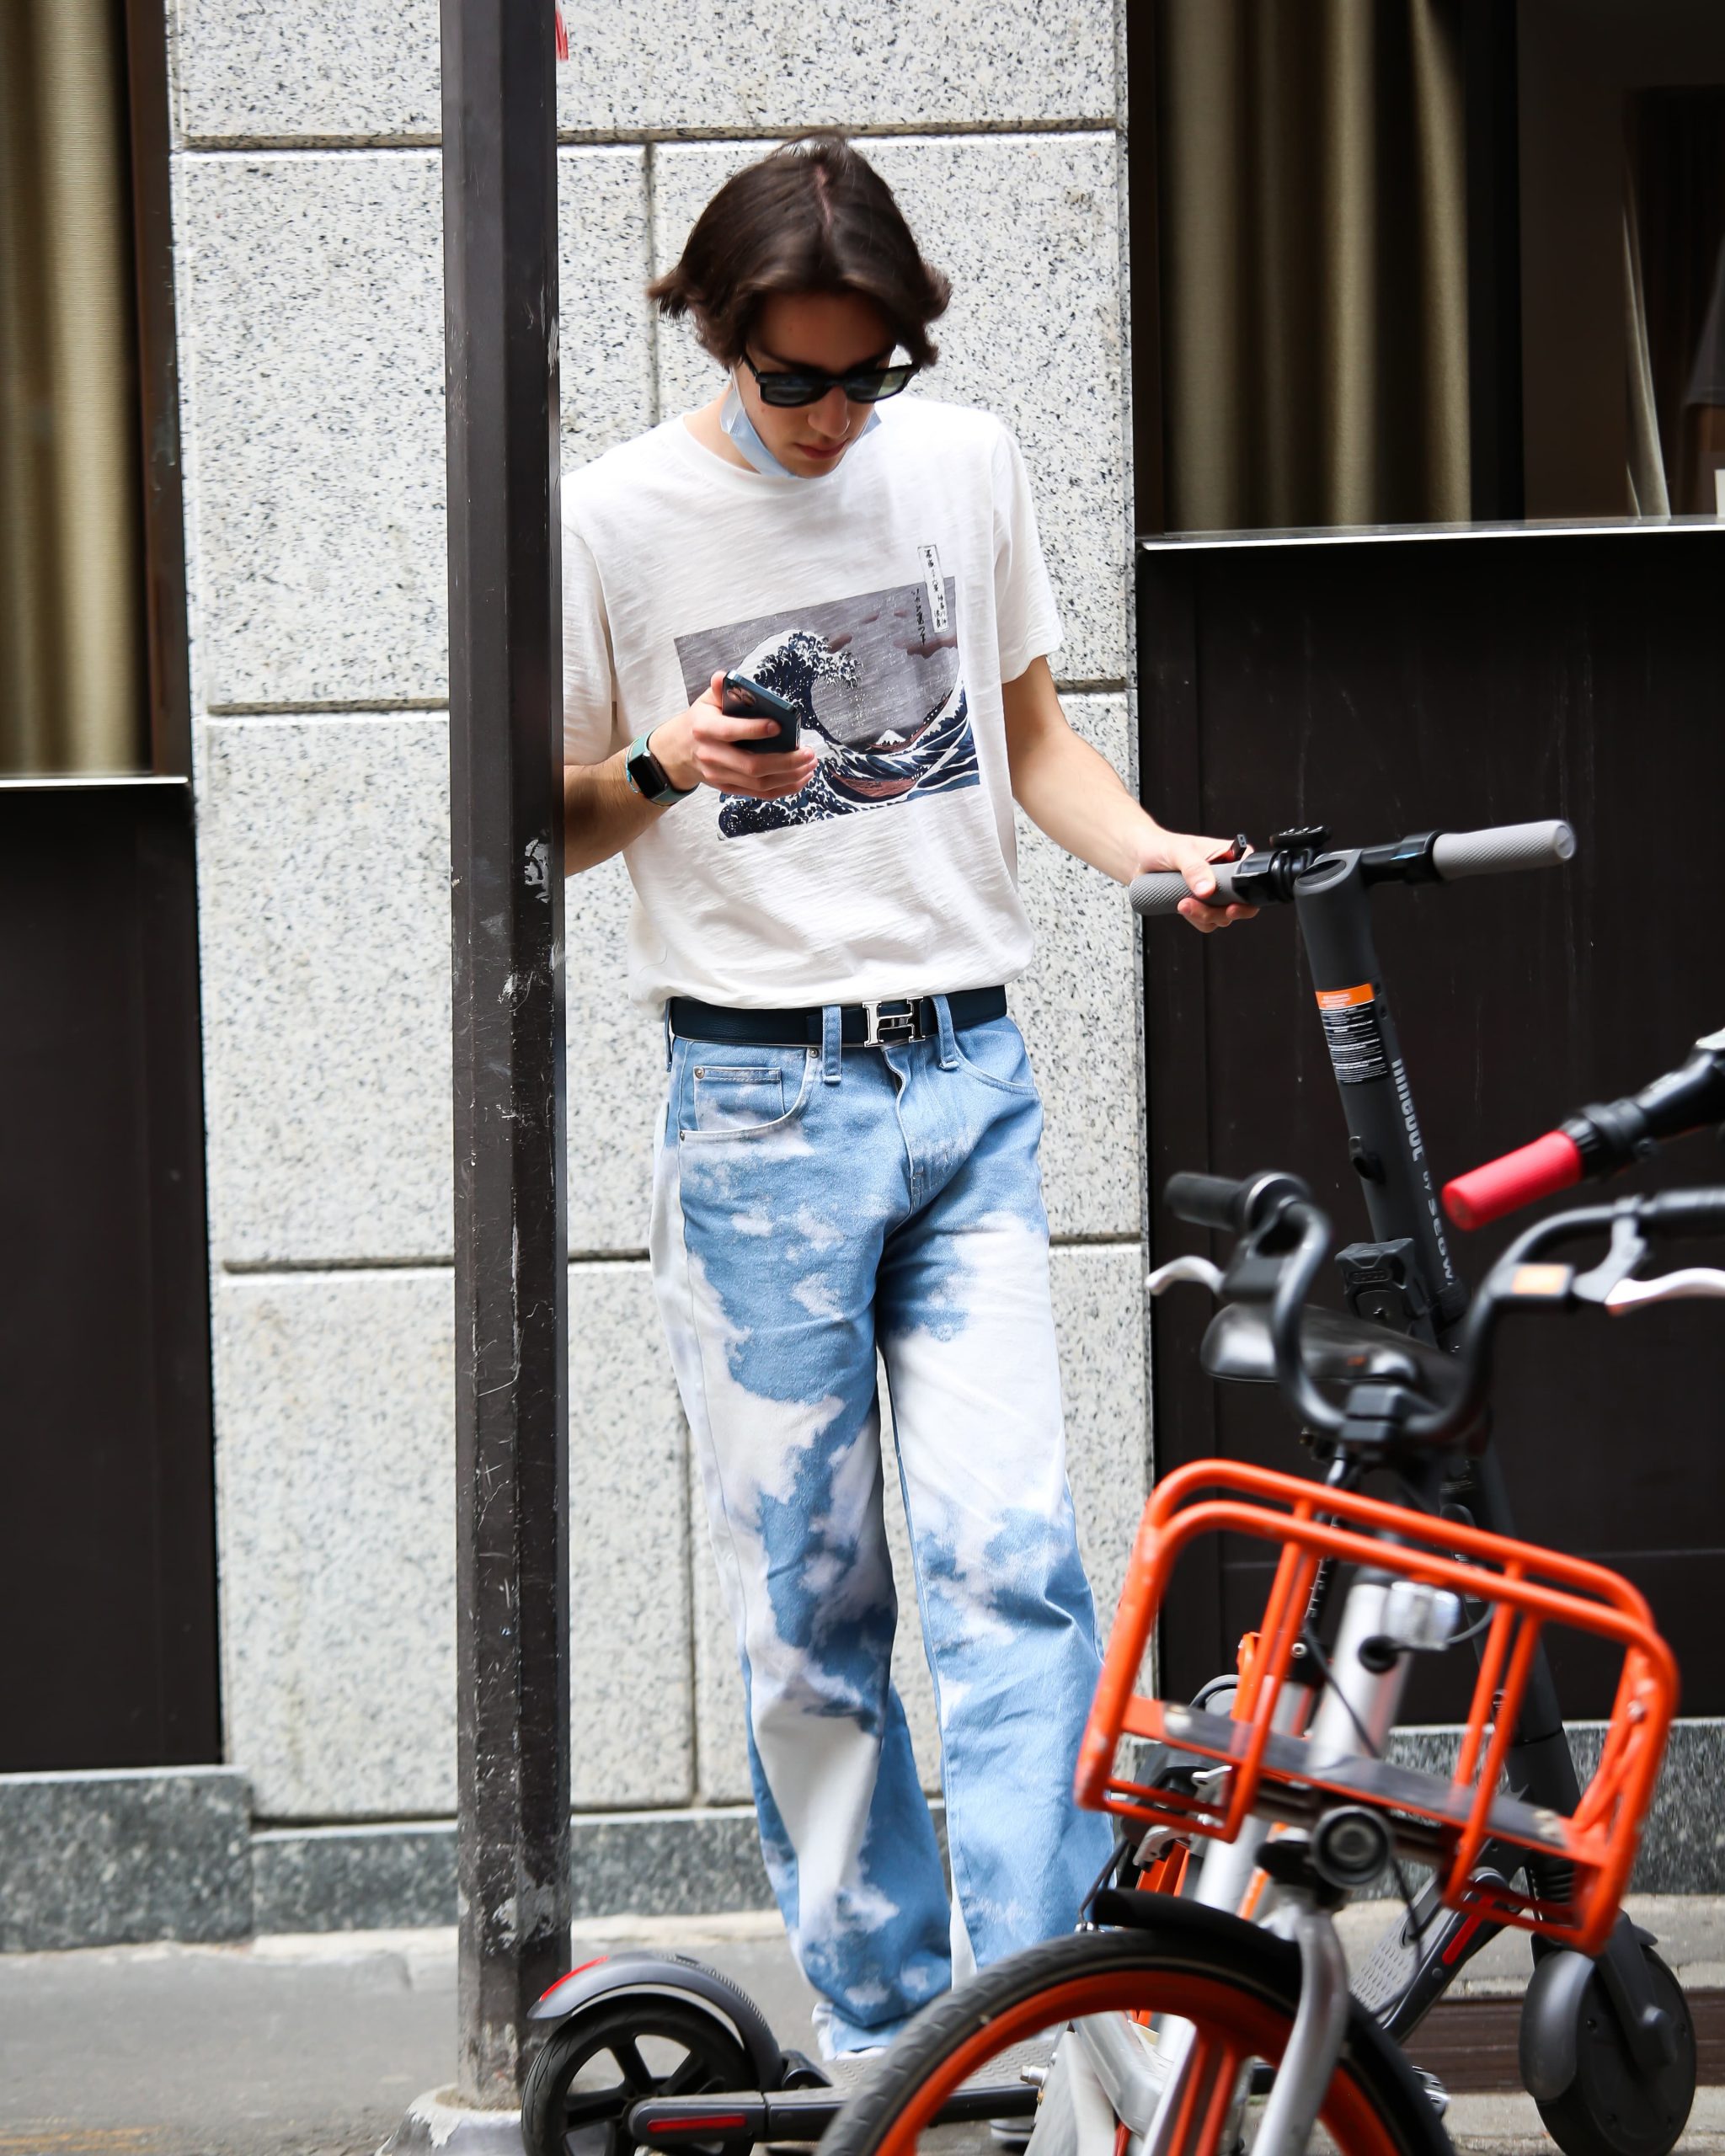 Milan Early May Spring 2021 Street Style by Thomas Razzano | The Impression